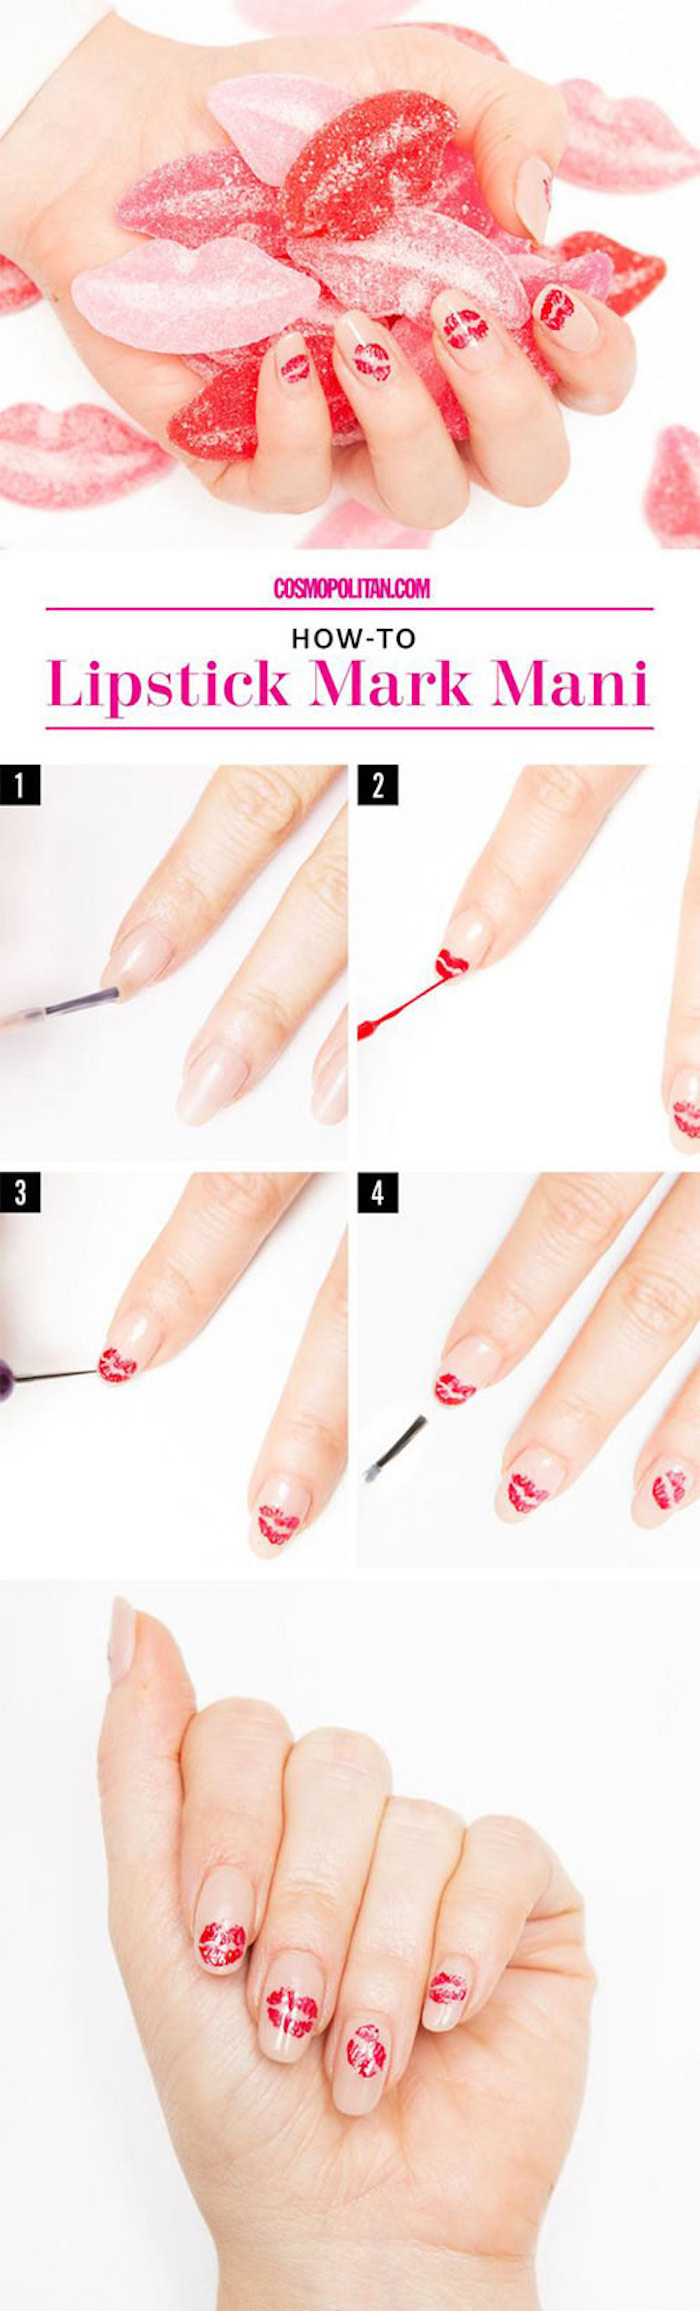 lipstick mark mani photo collage step by step diy tutorial valentines day nails coffin shape